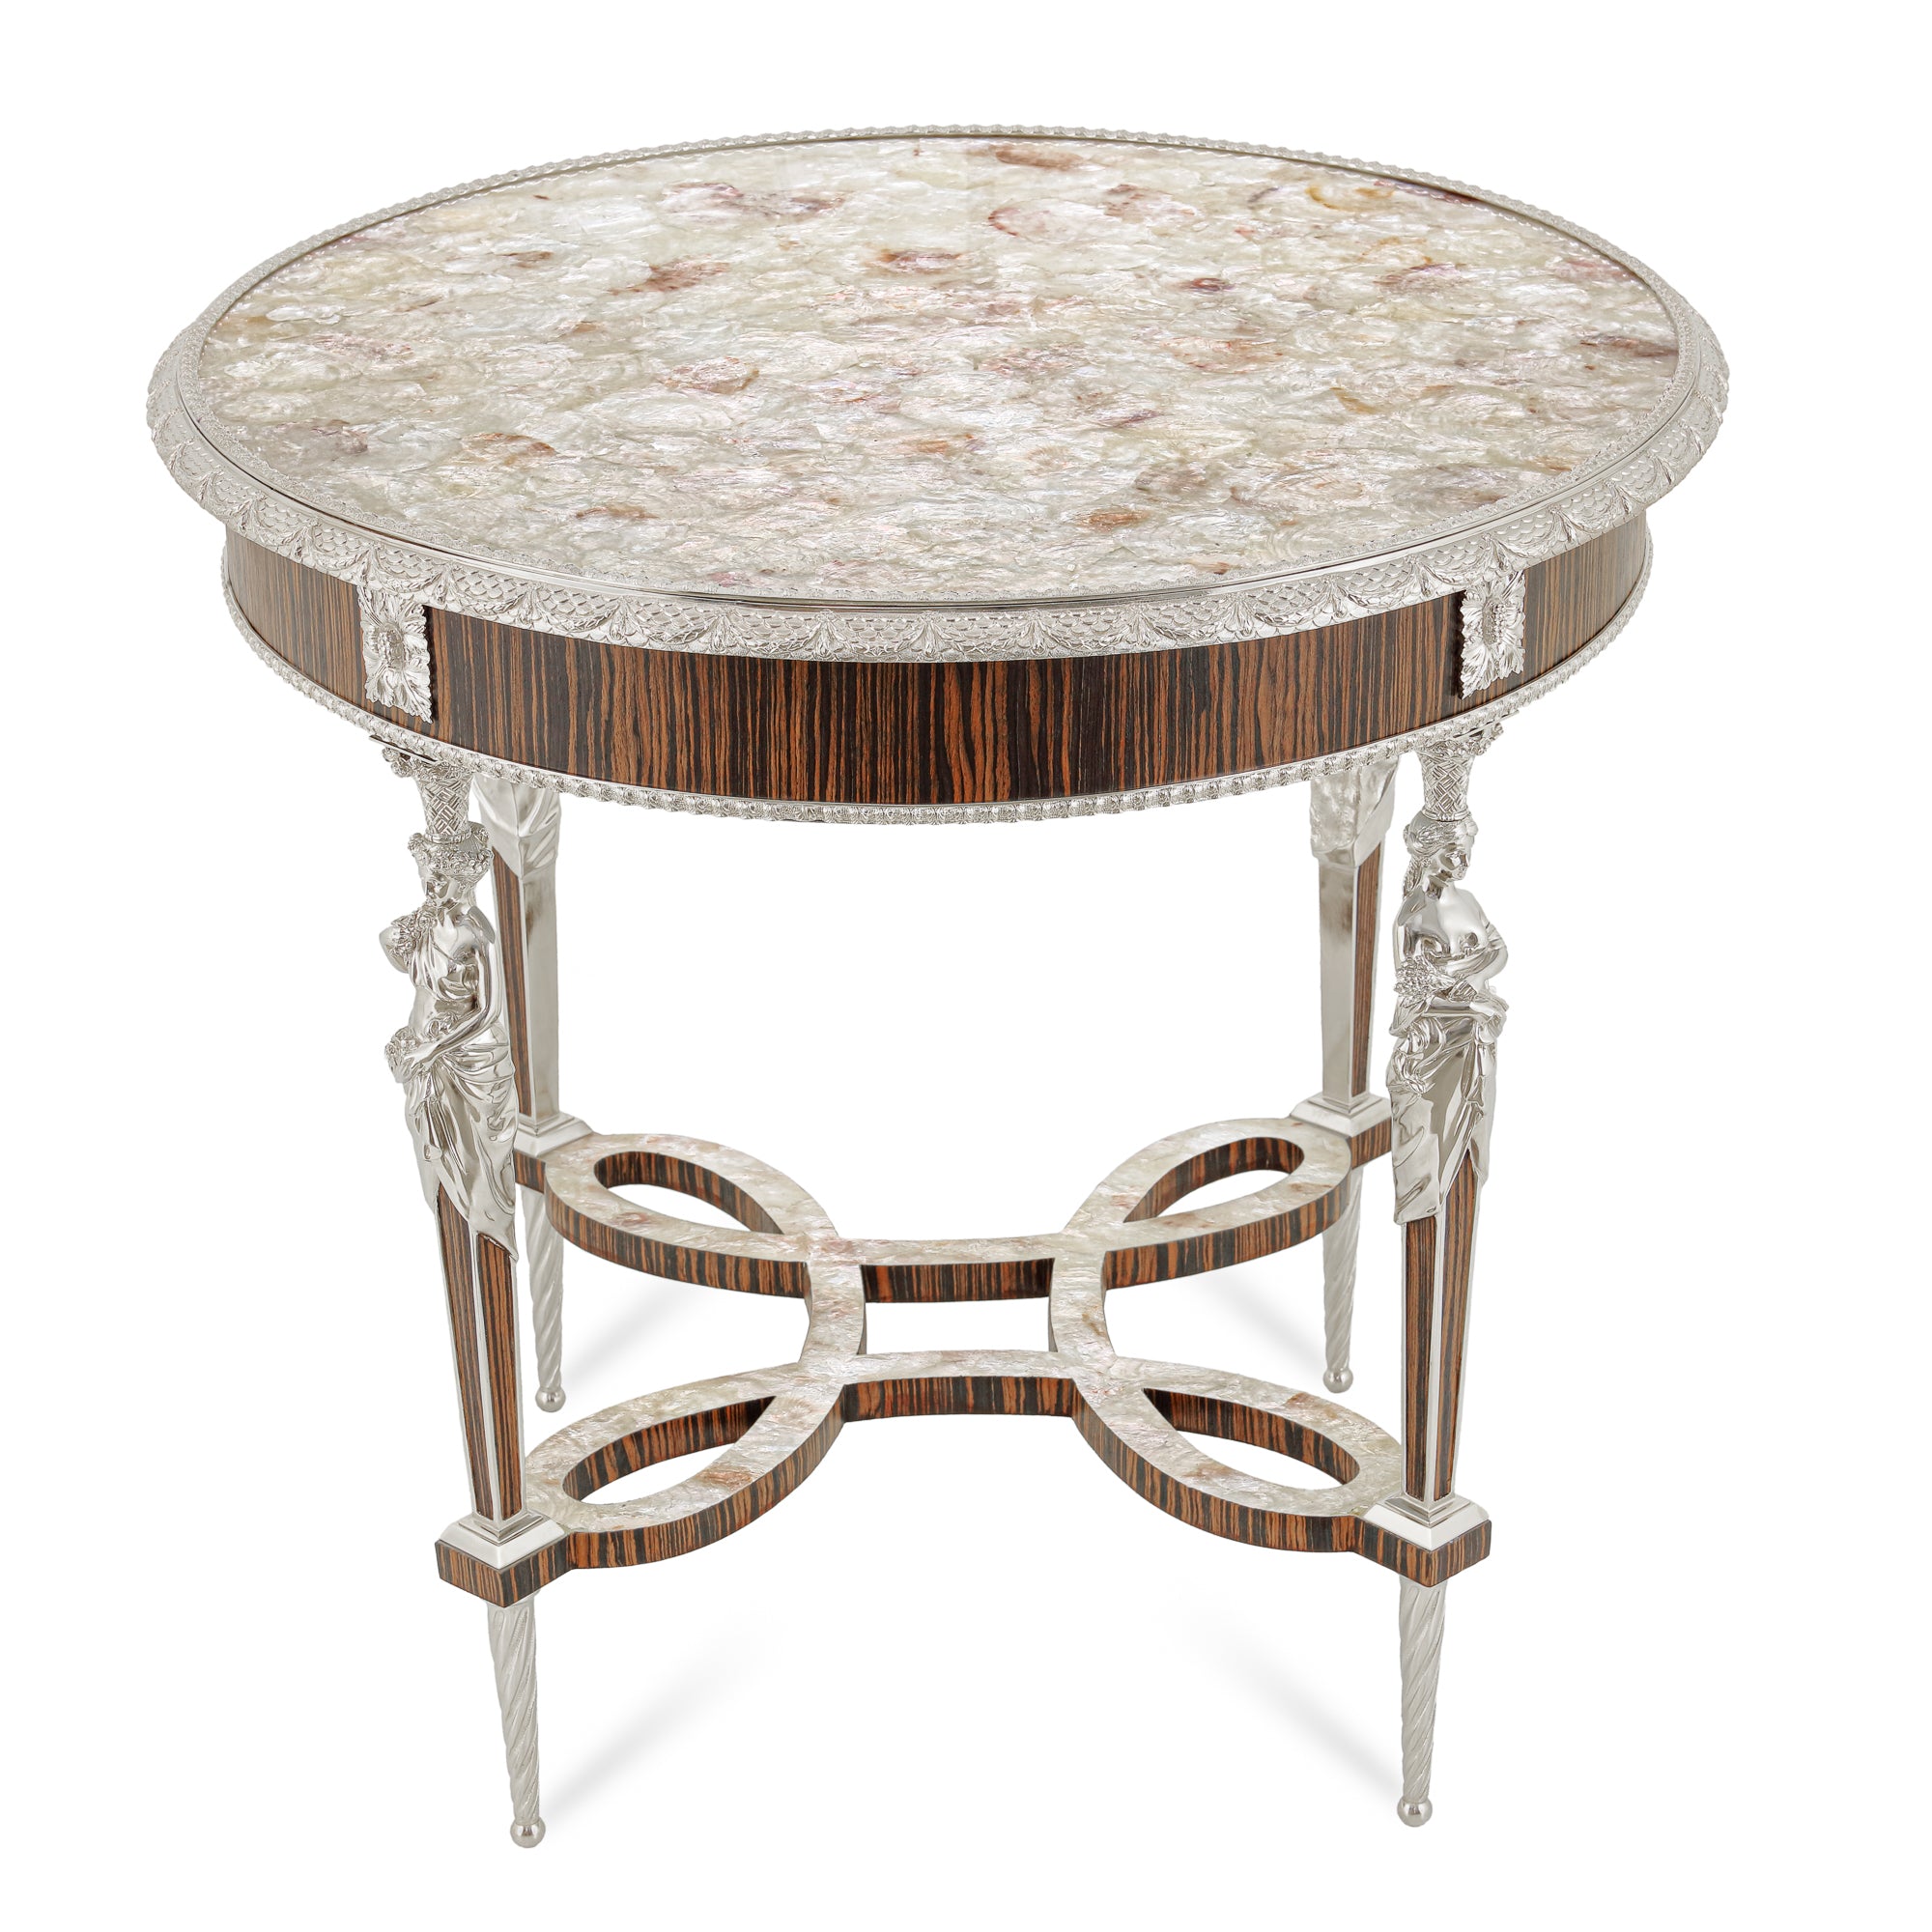 258MofPNwood - Round side table mother of pearl and wood